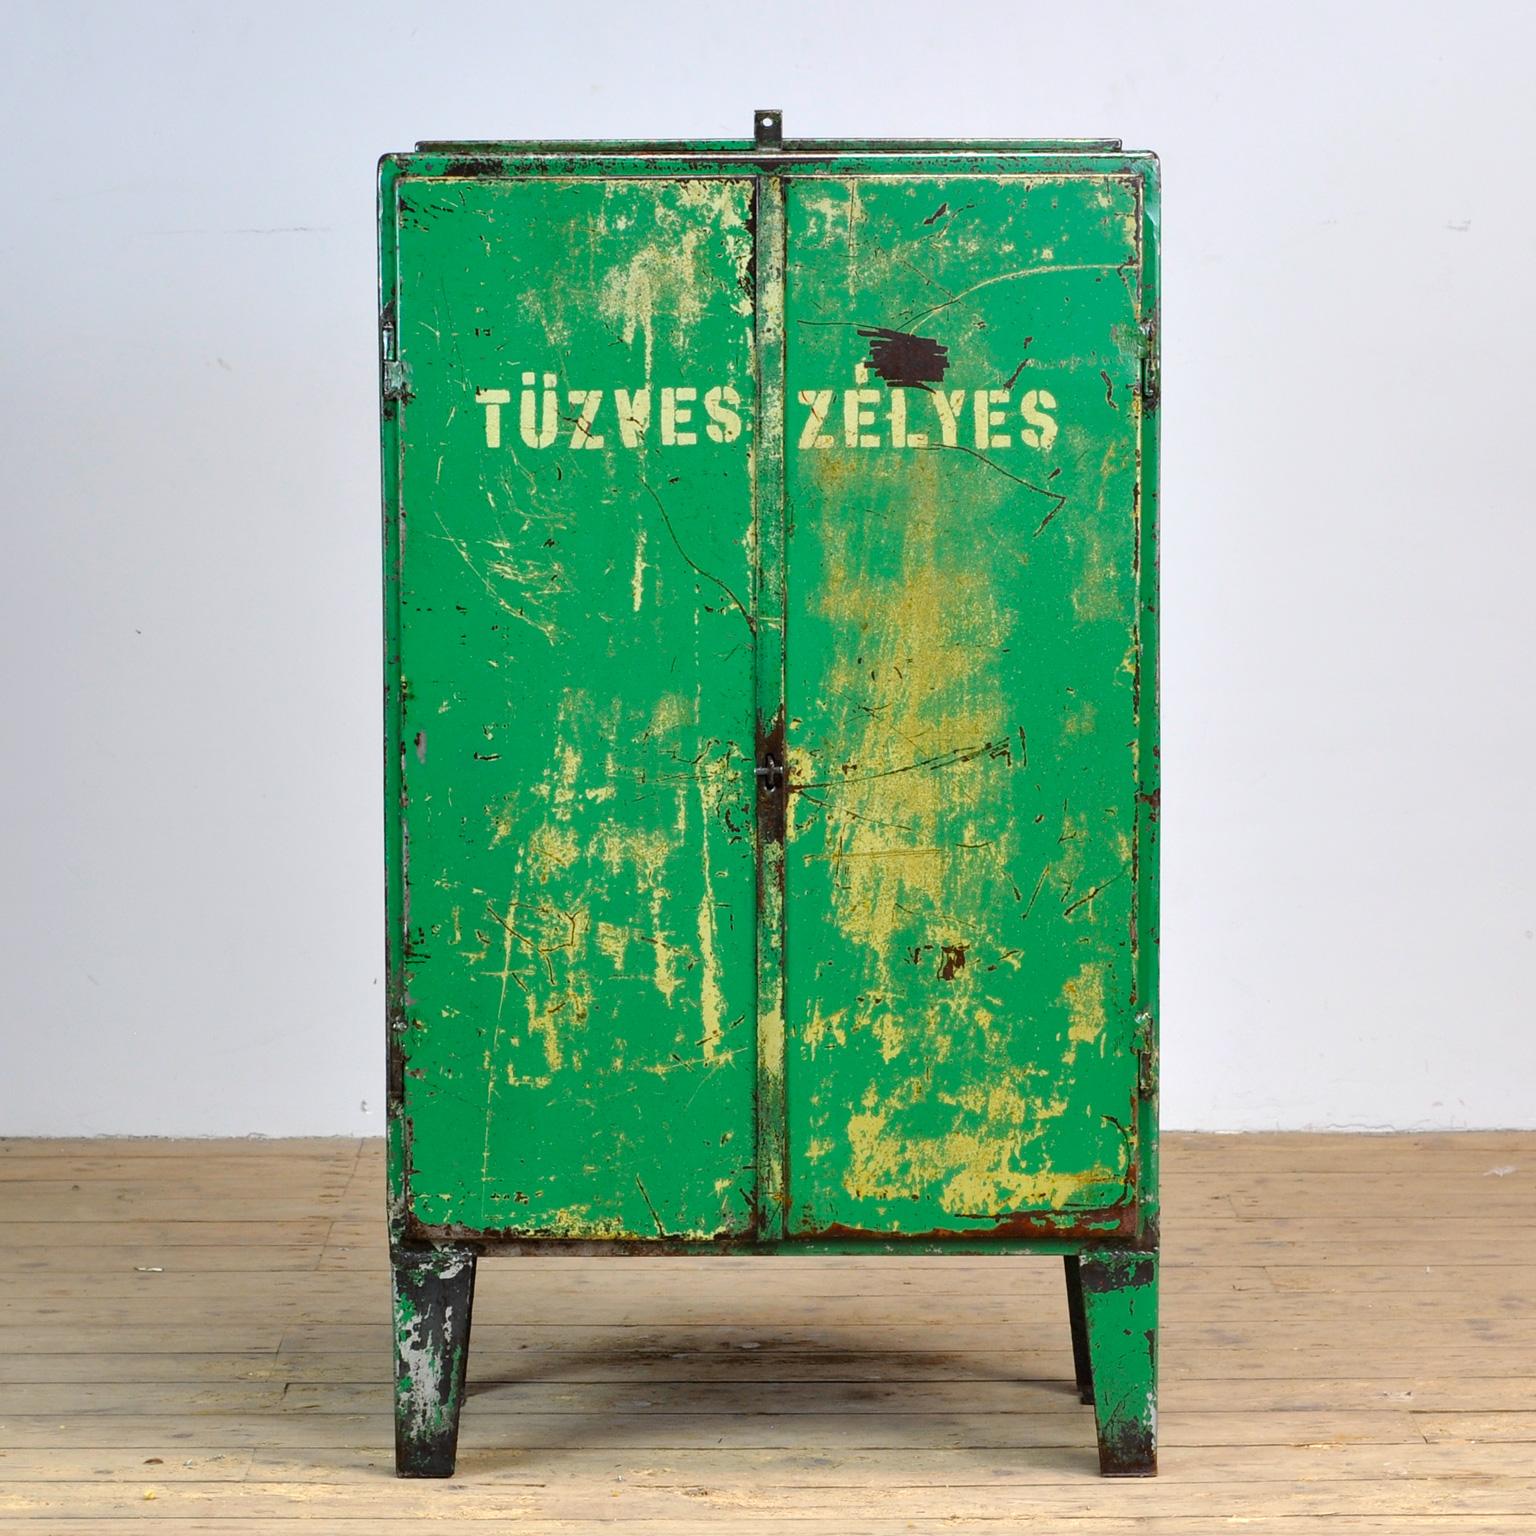 Iron industrial sideboard in nice vintage condition. Made of metal. With a valve on top. One shelve and two drawers on the inside. The text “TÜZVESZÉLYES” printed on the case means FLAMMABLE. Treated for rust and finished with a transparant varnish.